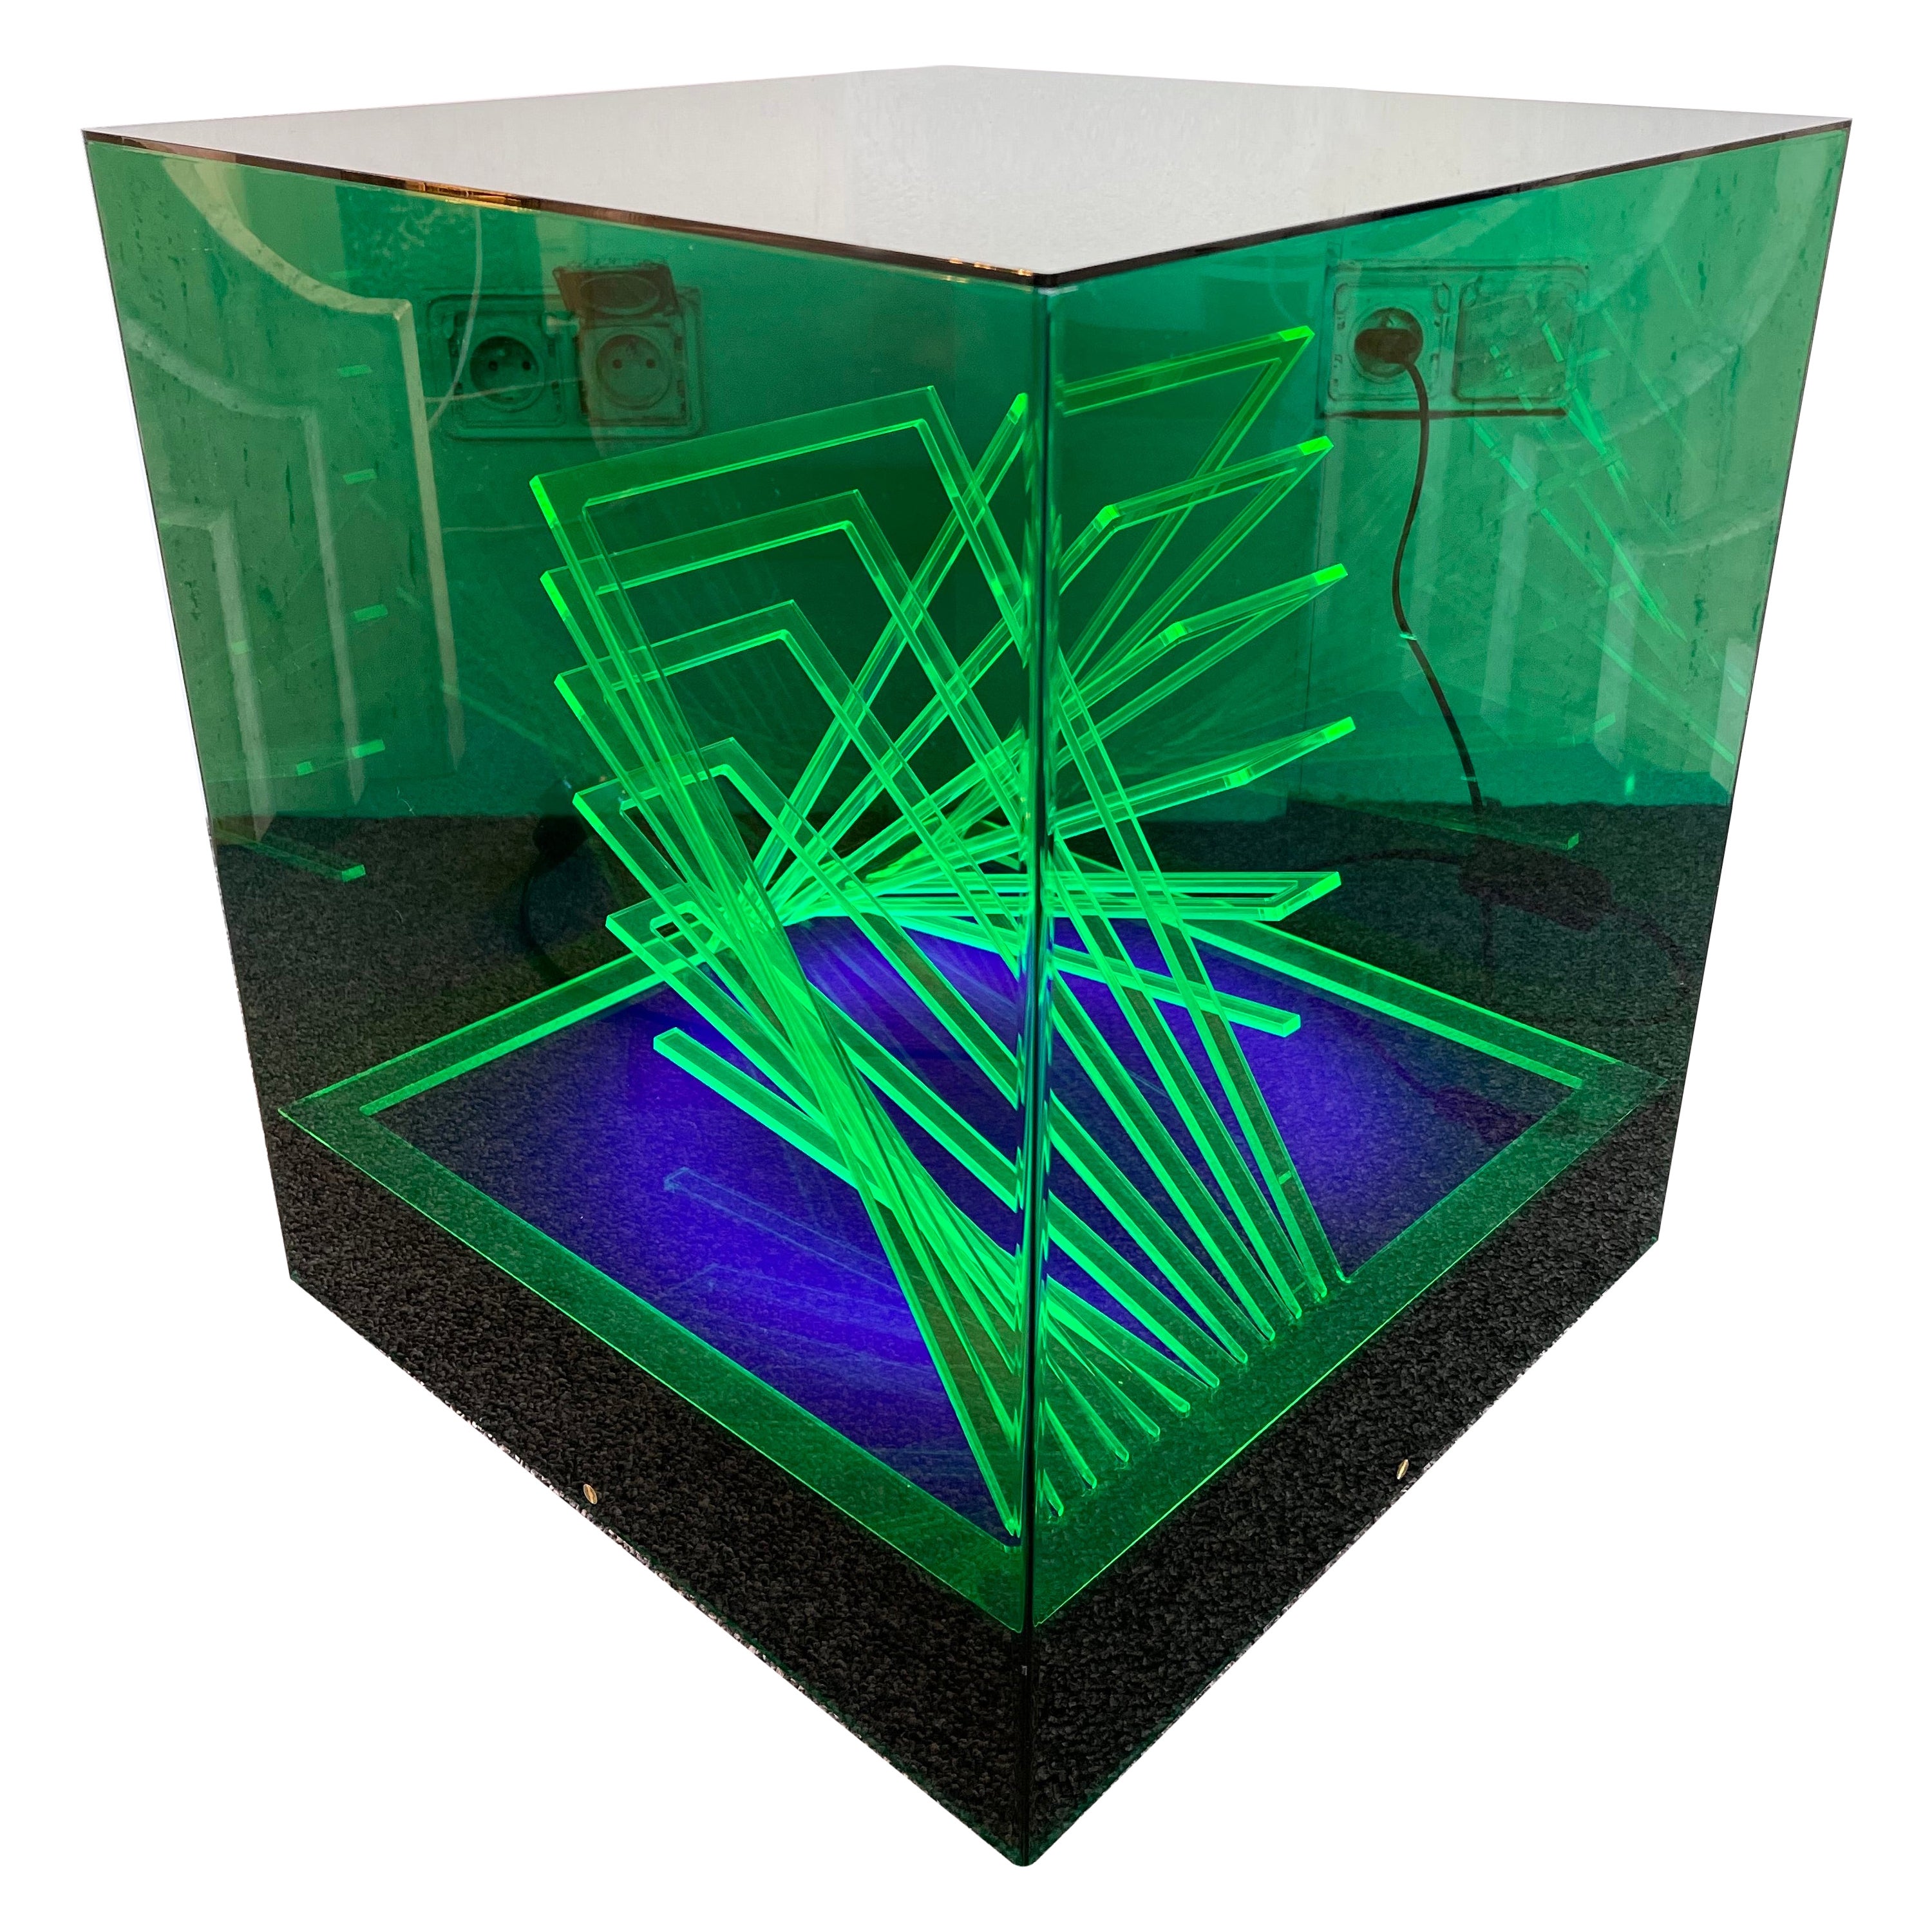 Lamp Sculpture Cinetic Cubo Di Teo Plexiglass by James Riviere, Italy, 1970s